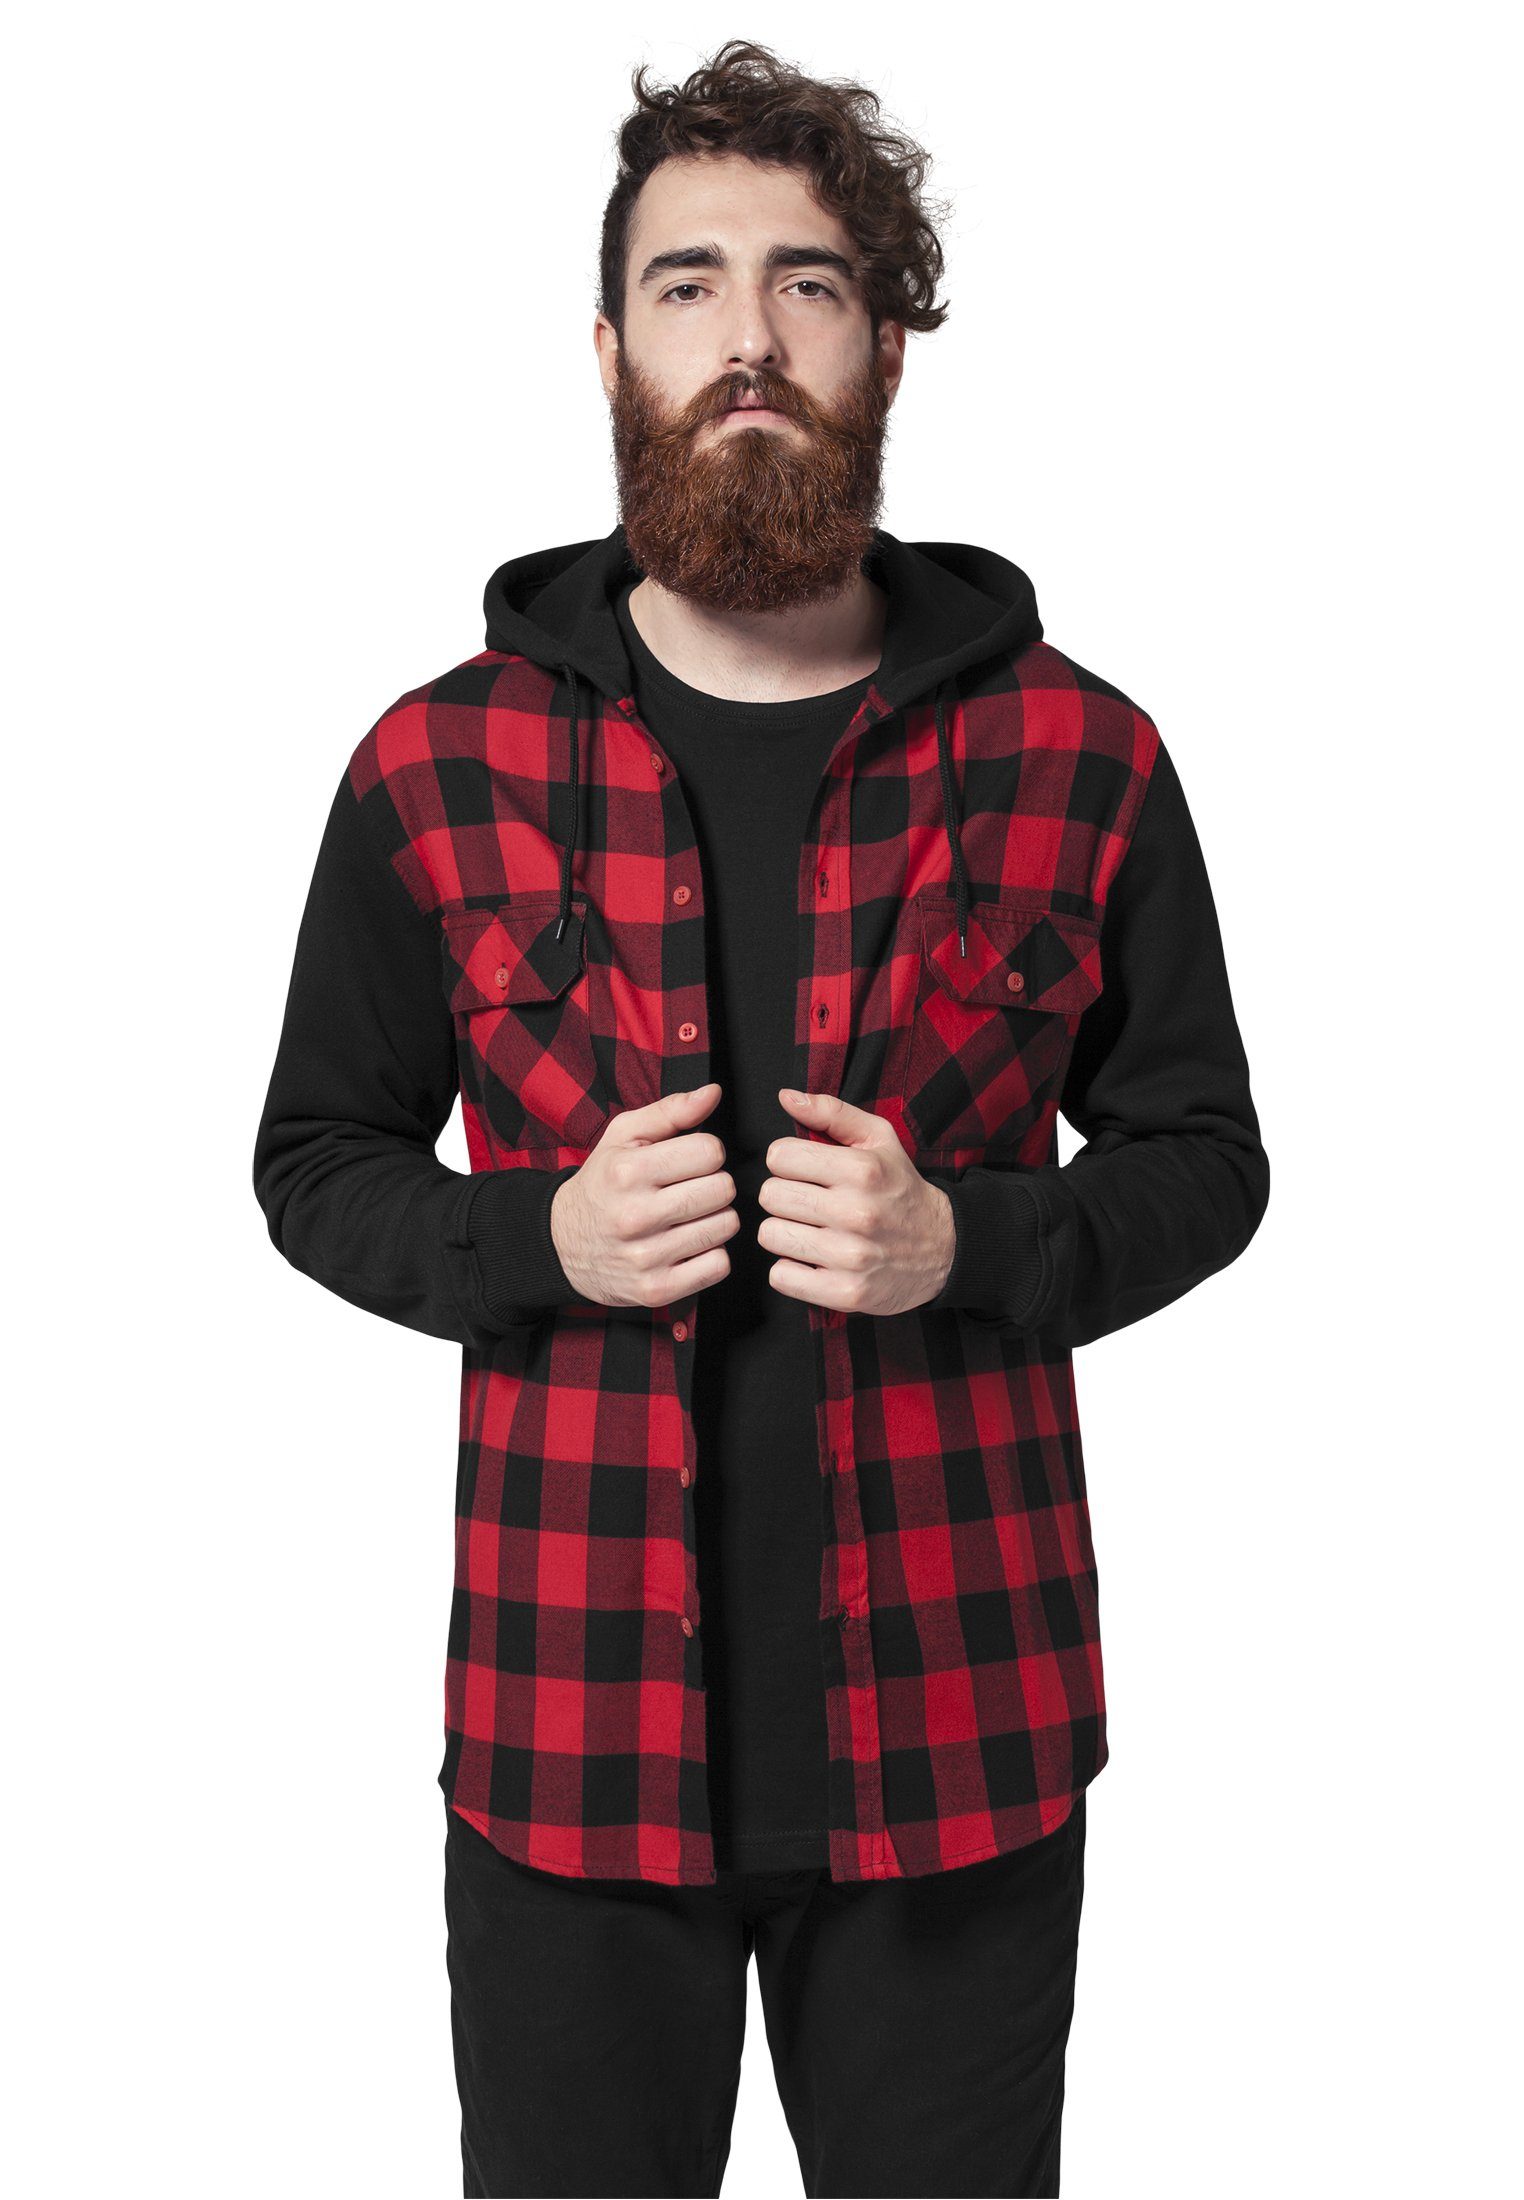 Sleeve Herren Checked Hooded URBAN blk/red/bl CLASSICS Sweat Shirtjacke Flanell Shirt (1-tlg)